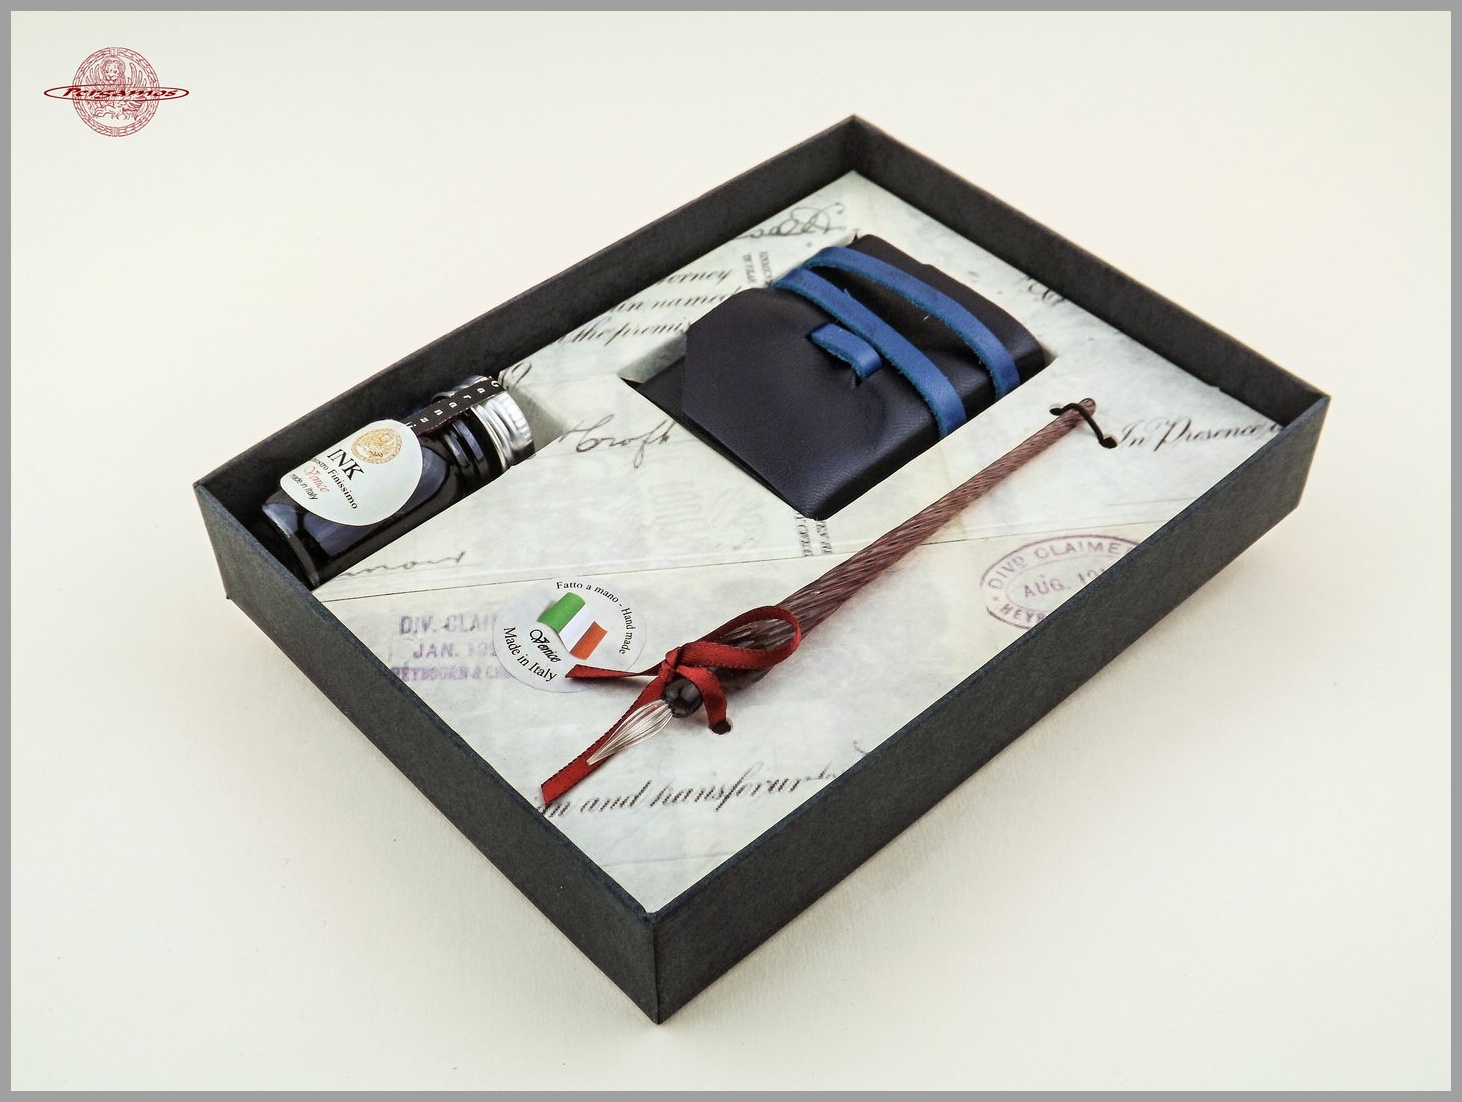 GLASS PEN AND LEATHER BOOK SET